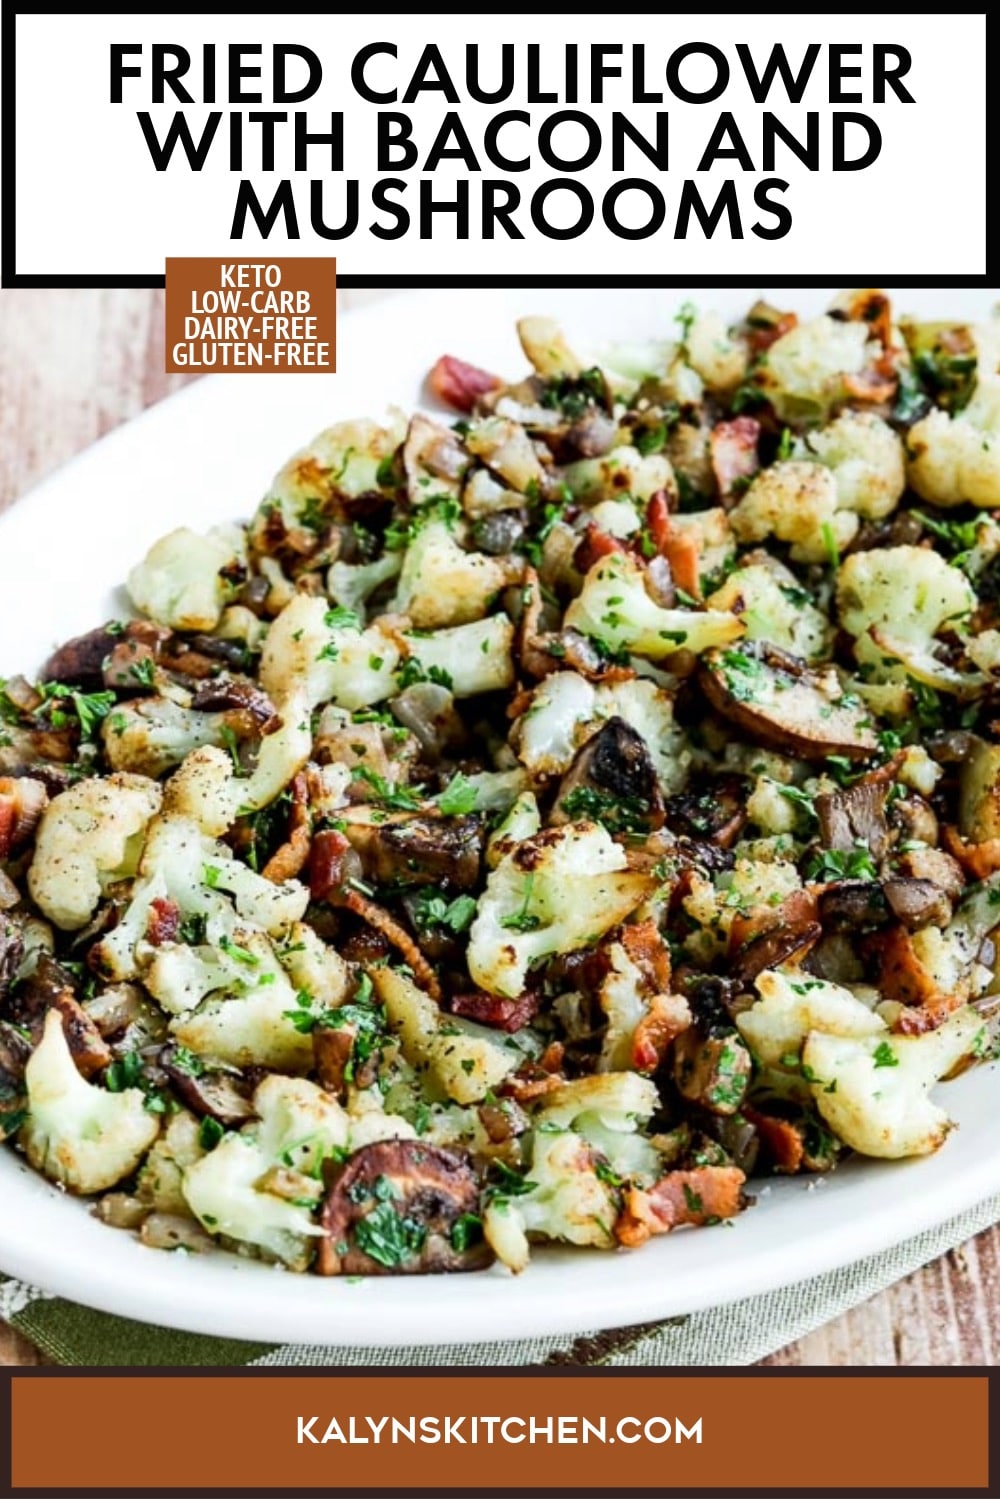 Pinterest image of Fried Cauliflower with Bacon and Mushrooms